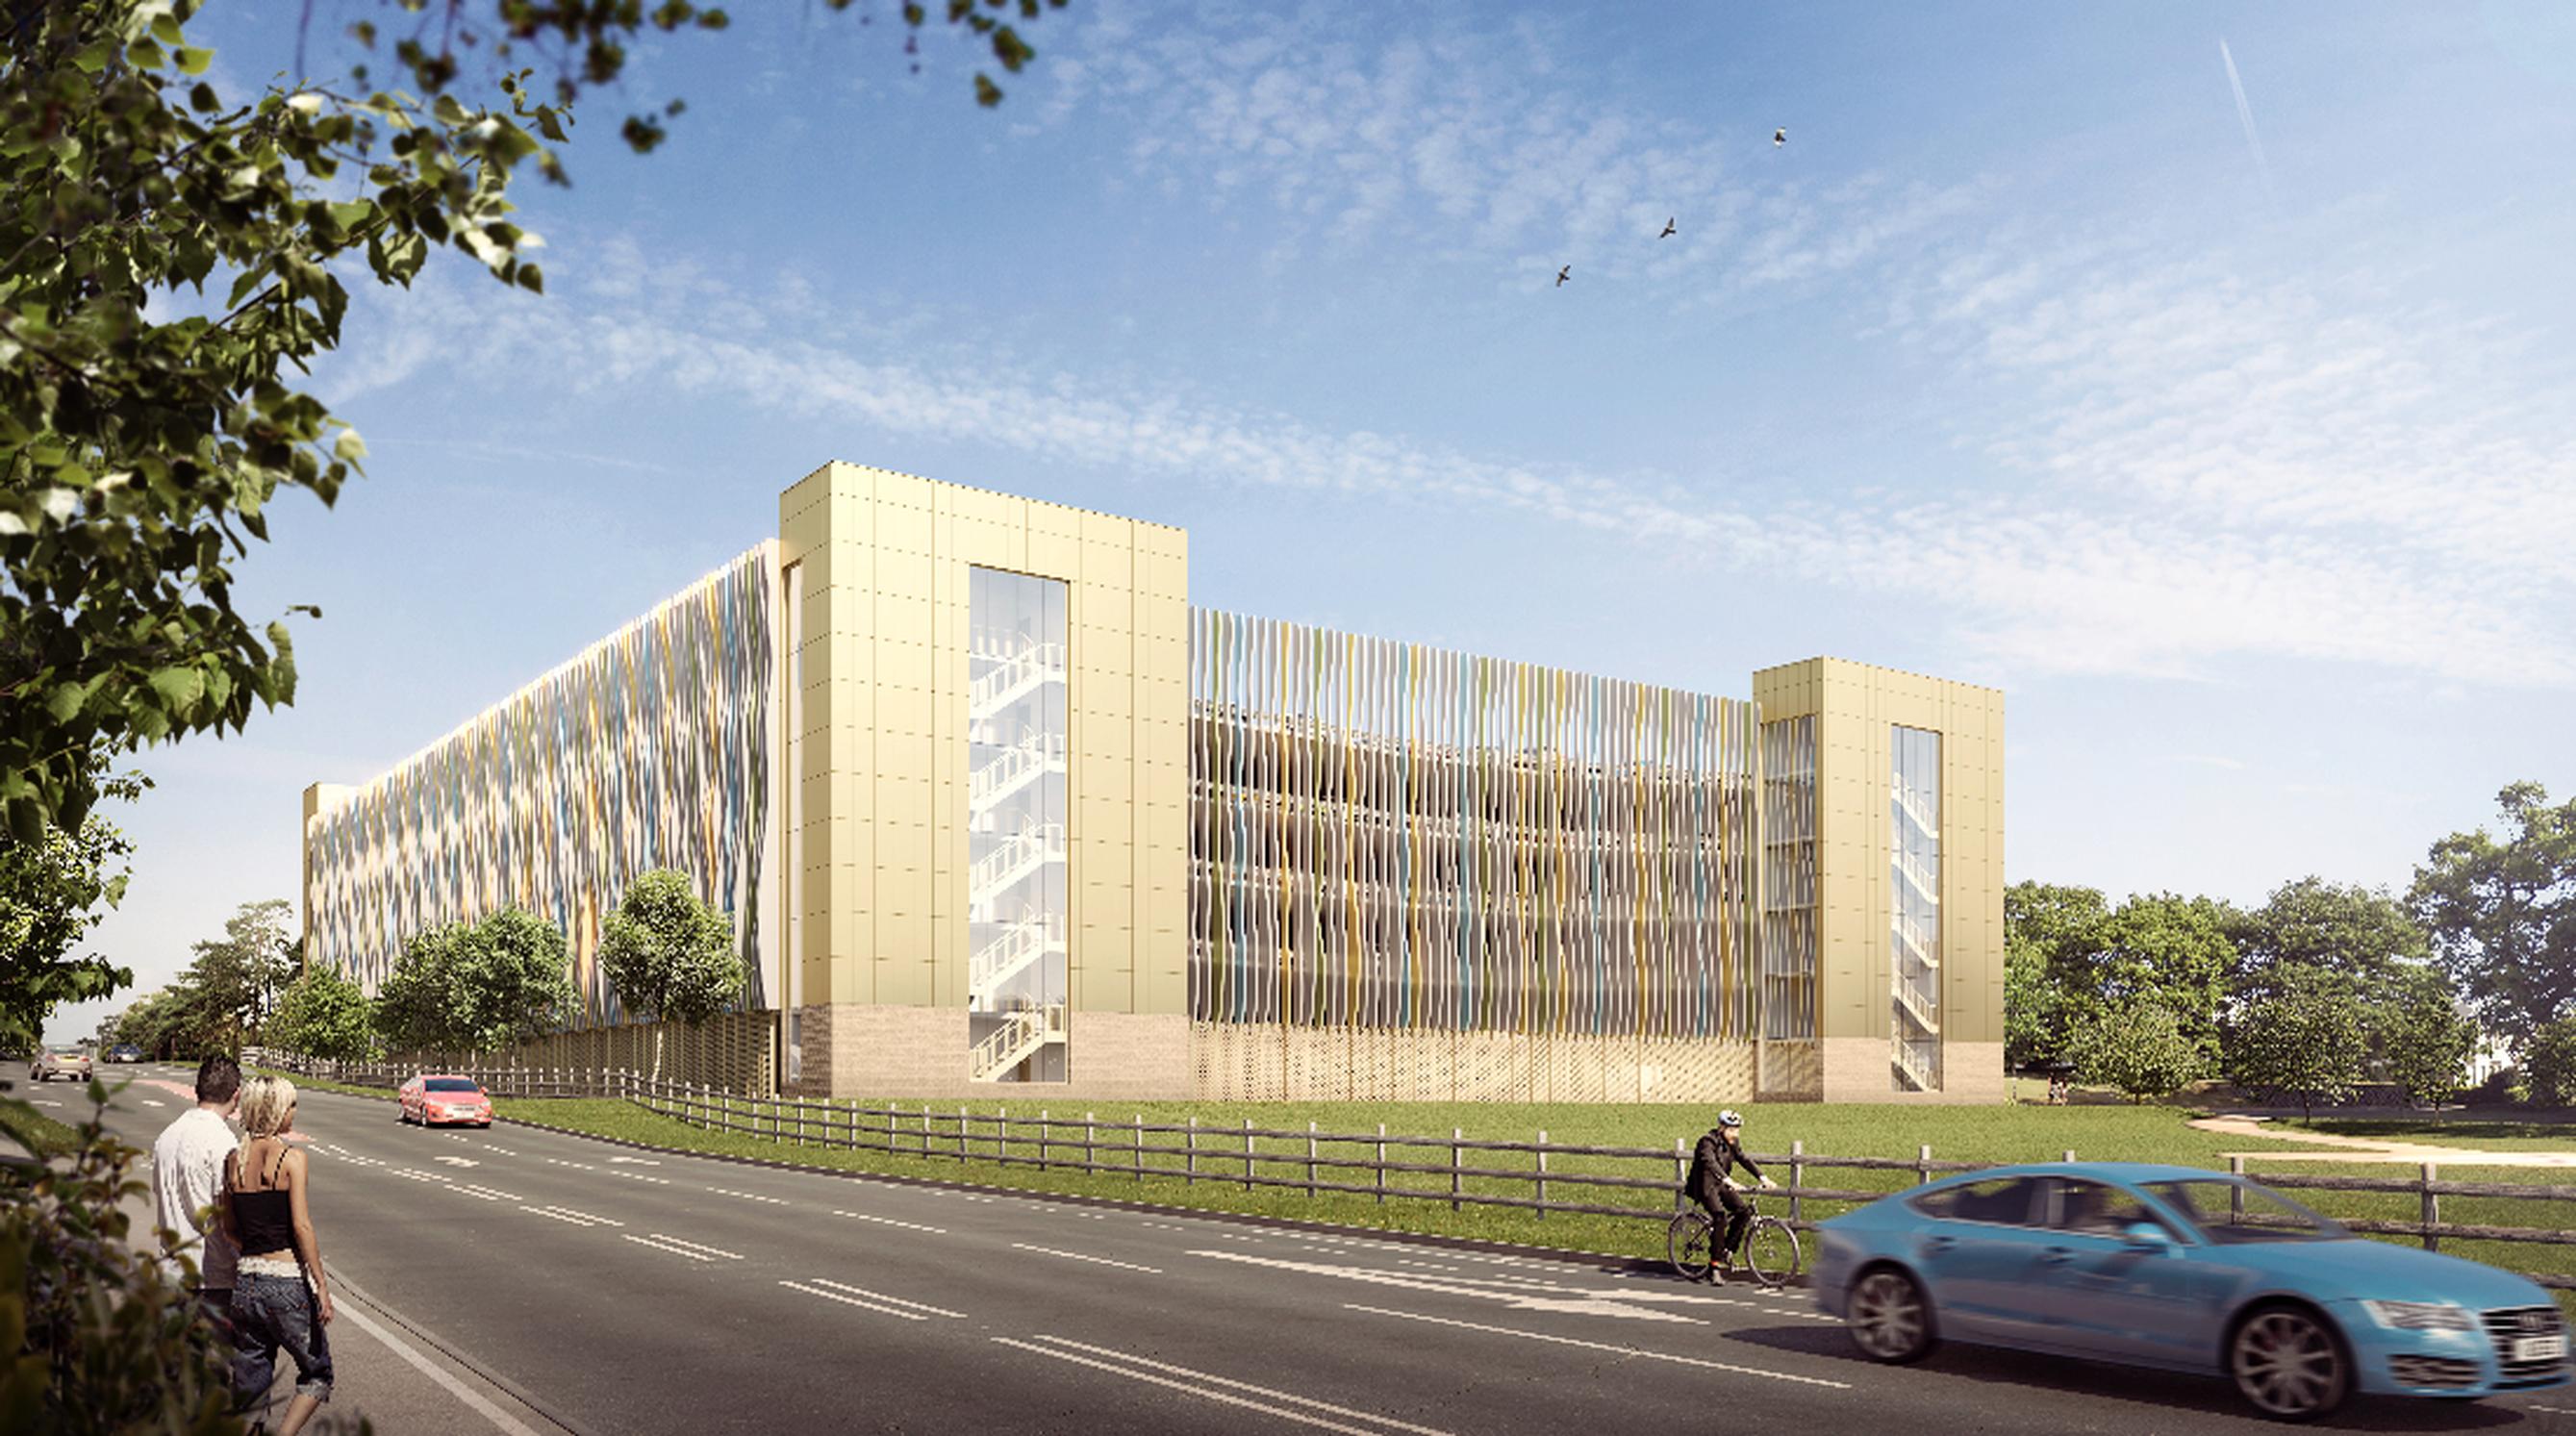 Phase 2 design for the QEH car park